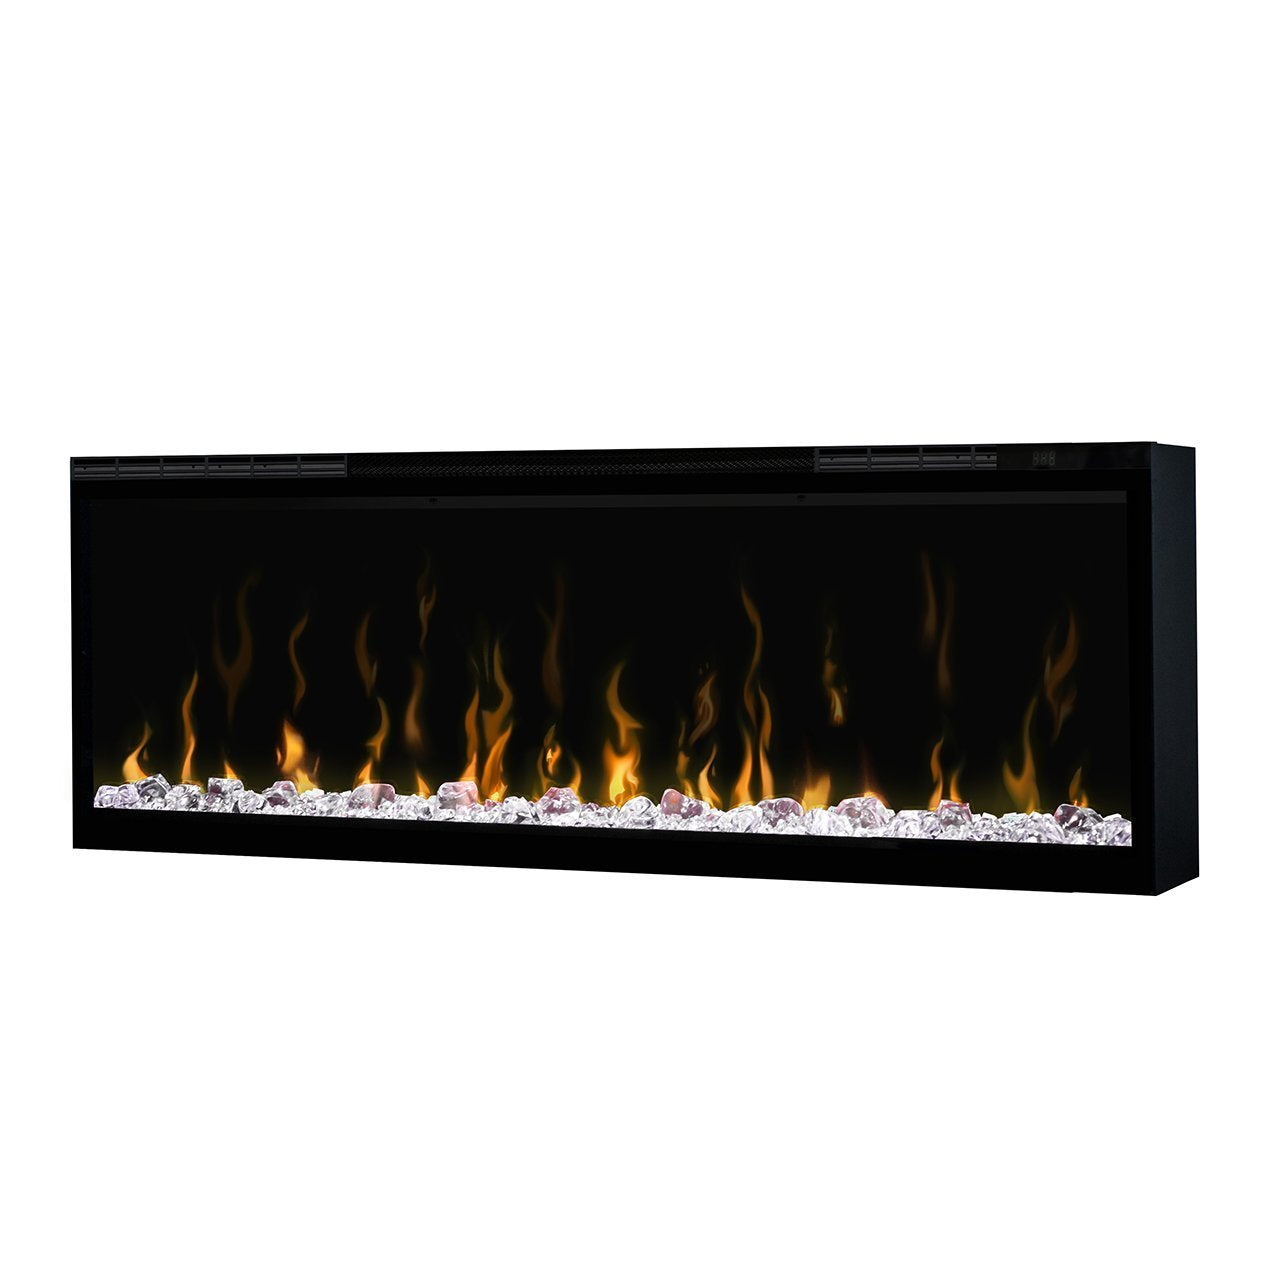 Dimplex 50" LED Touch Screen Wall Mount Fireplace